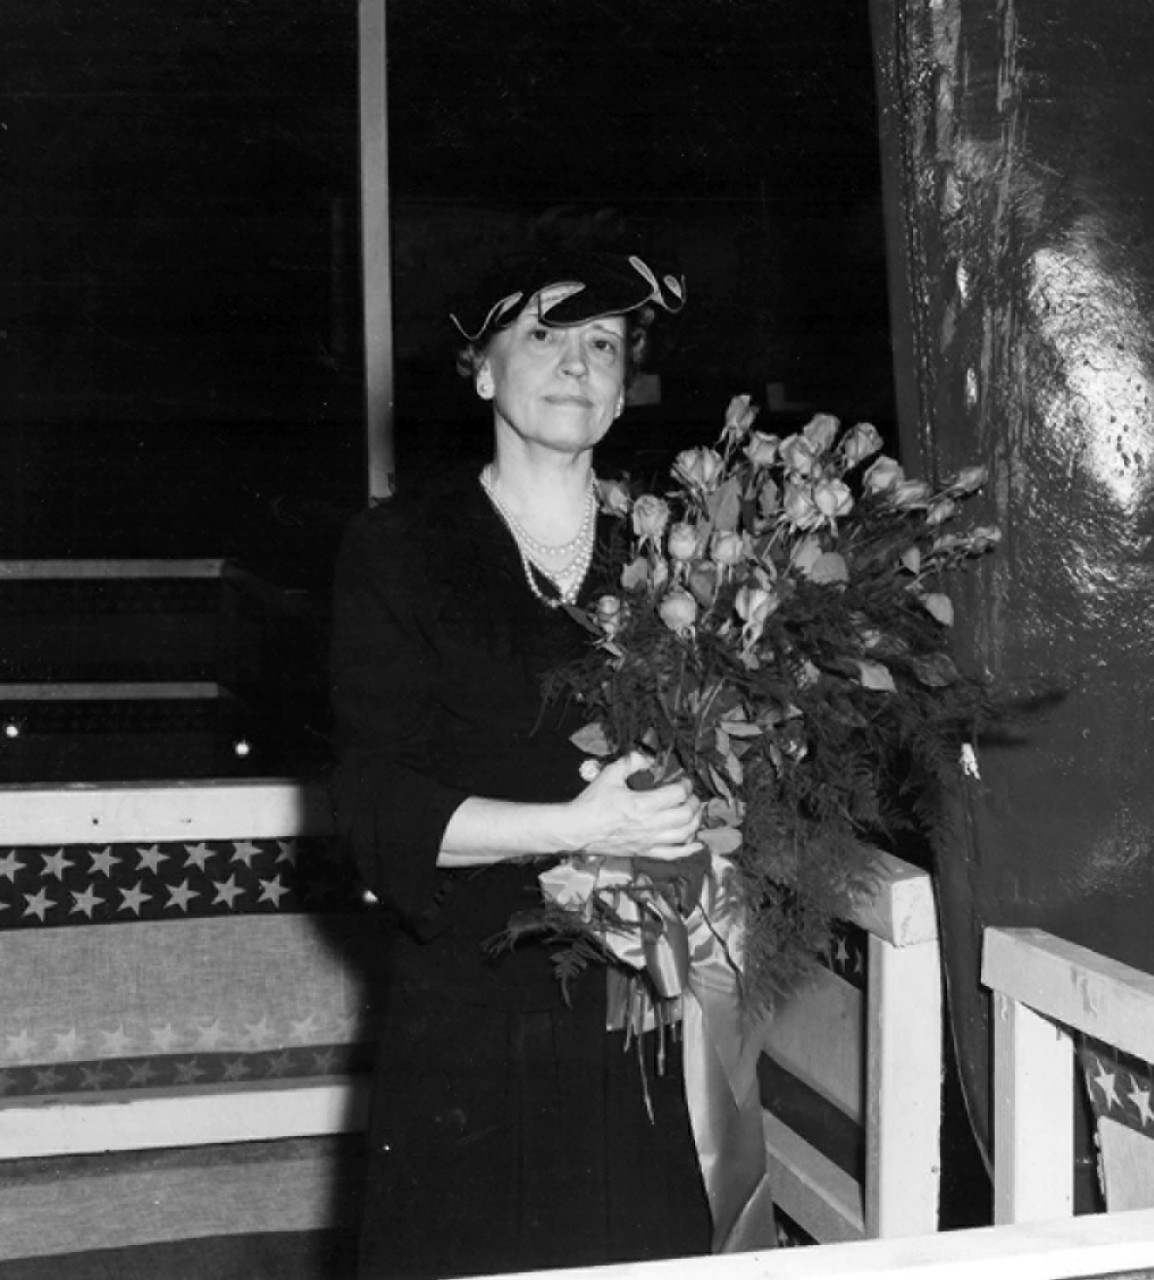 Louise F. Bache, the ship’s sponsor, during the launching ceremony at Staten Island, N.Y., 27 July 1942. (Bache (DD-470), Ships History, Naval History and Heritage Command)